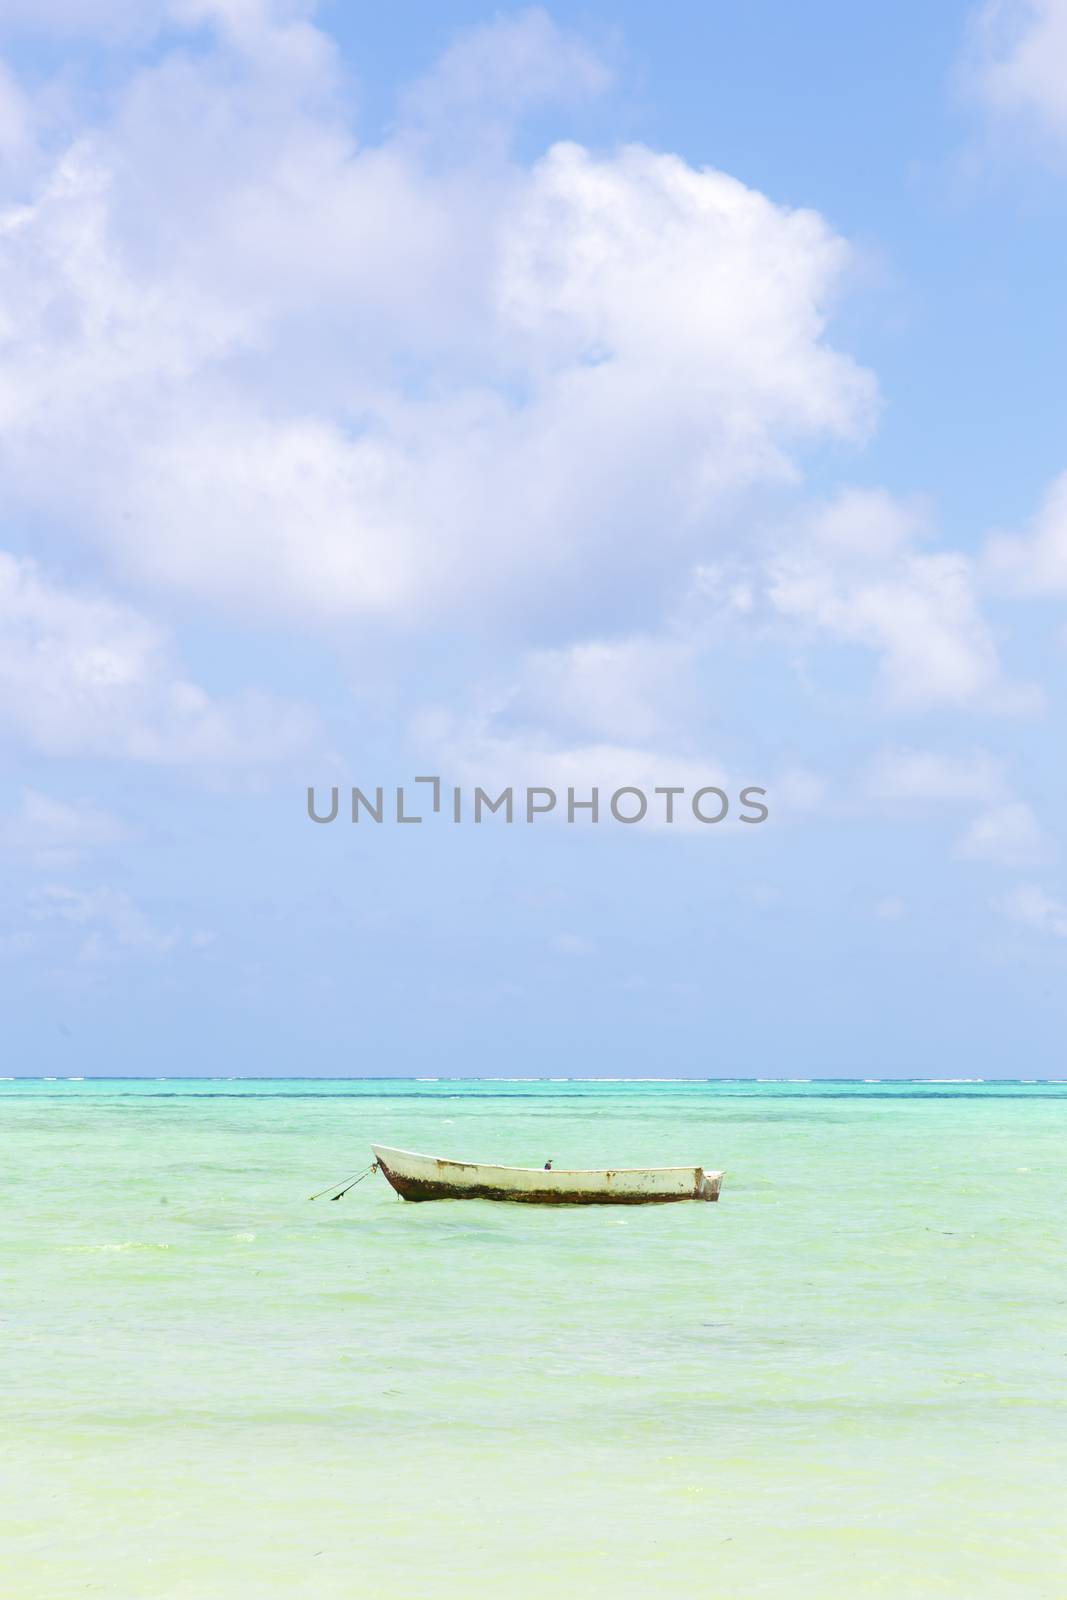 Fishing boat on picture perfect white sandy beach with turquoise blue sea, Paje, Zanzibar, Tanzania. by kasto